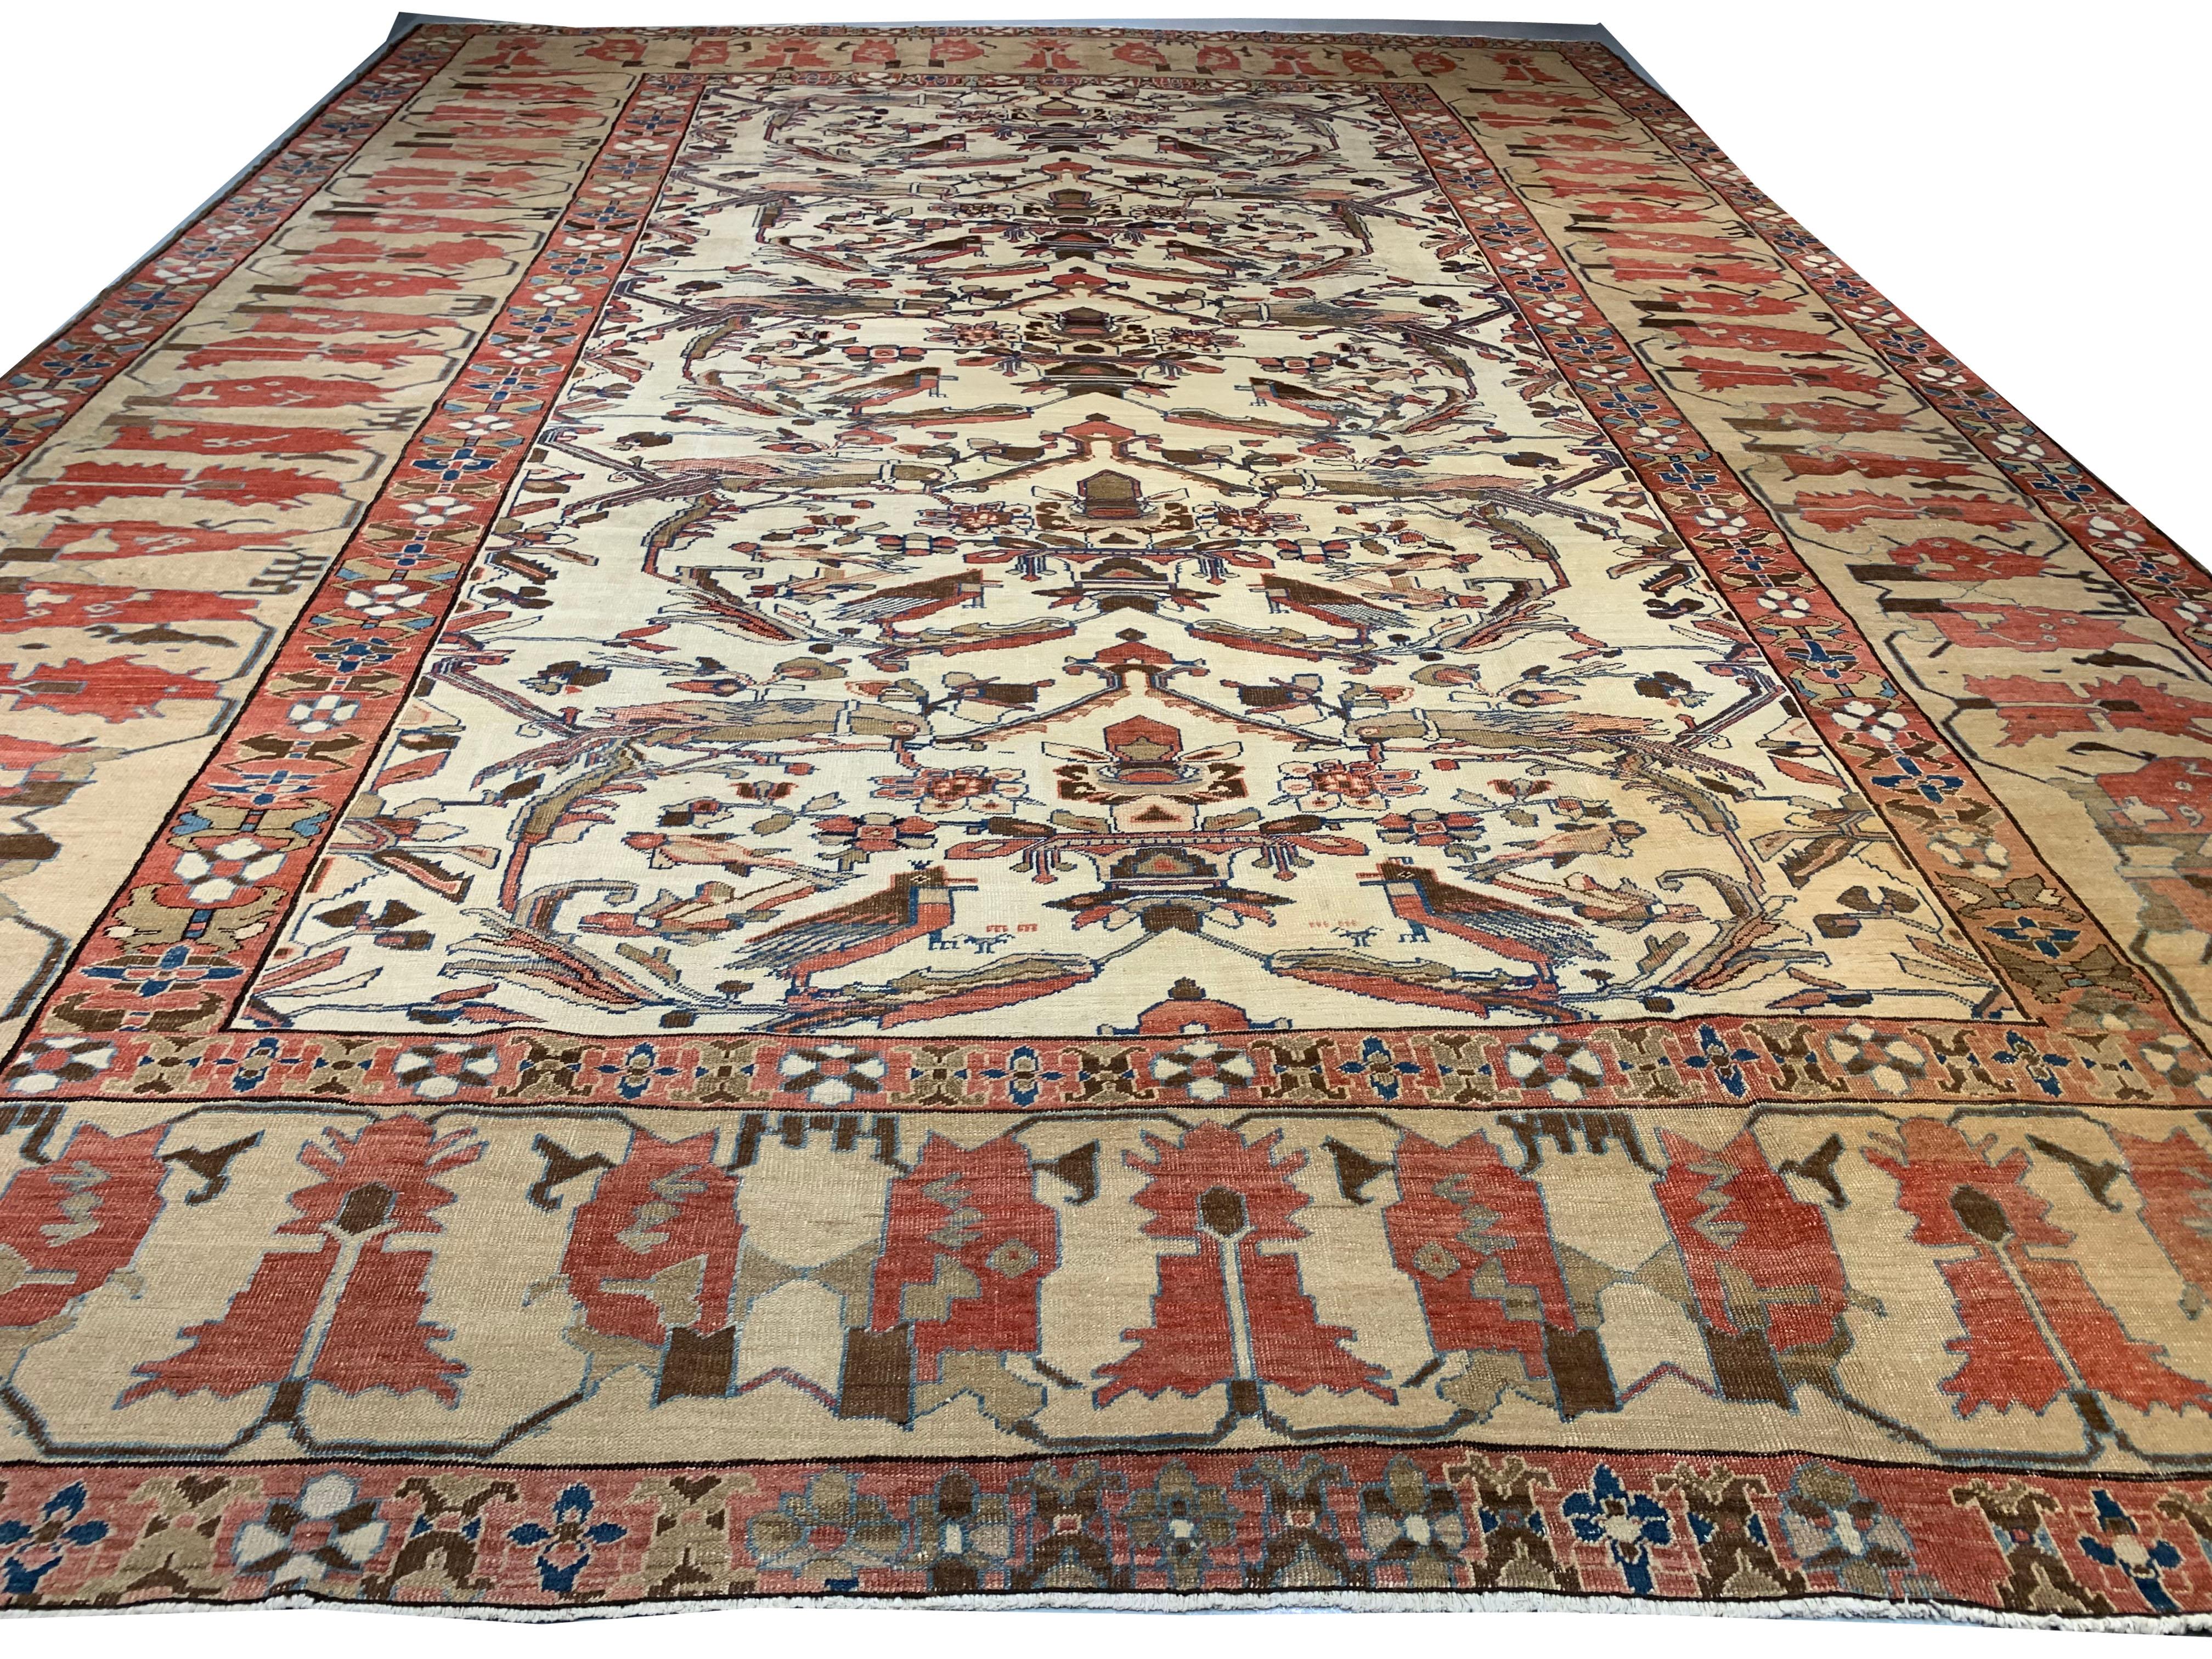 Antique Persian Bakshaish rug, 13' x 17'6. This is a truly unique, extremely imaginative NW Persian rustic carpet with a sky/land/water iconography. The two species of birds, larger parrots and smaller bulbuls (nightingales), refer to the sky and